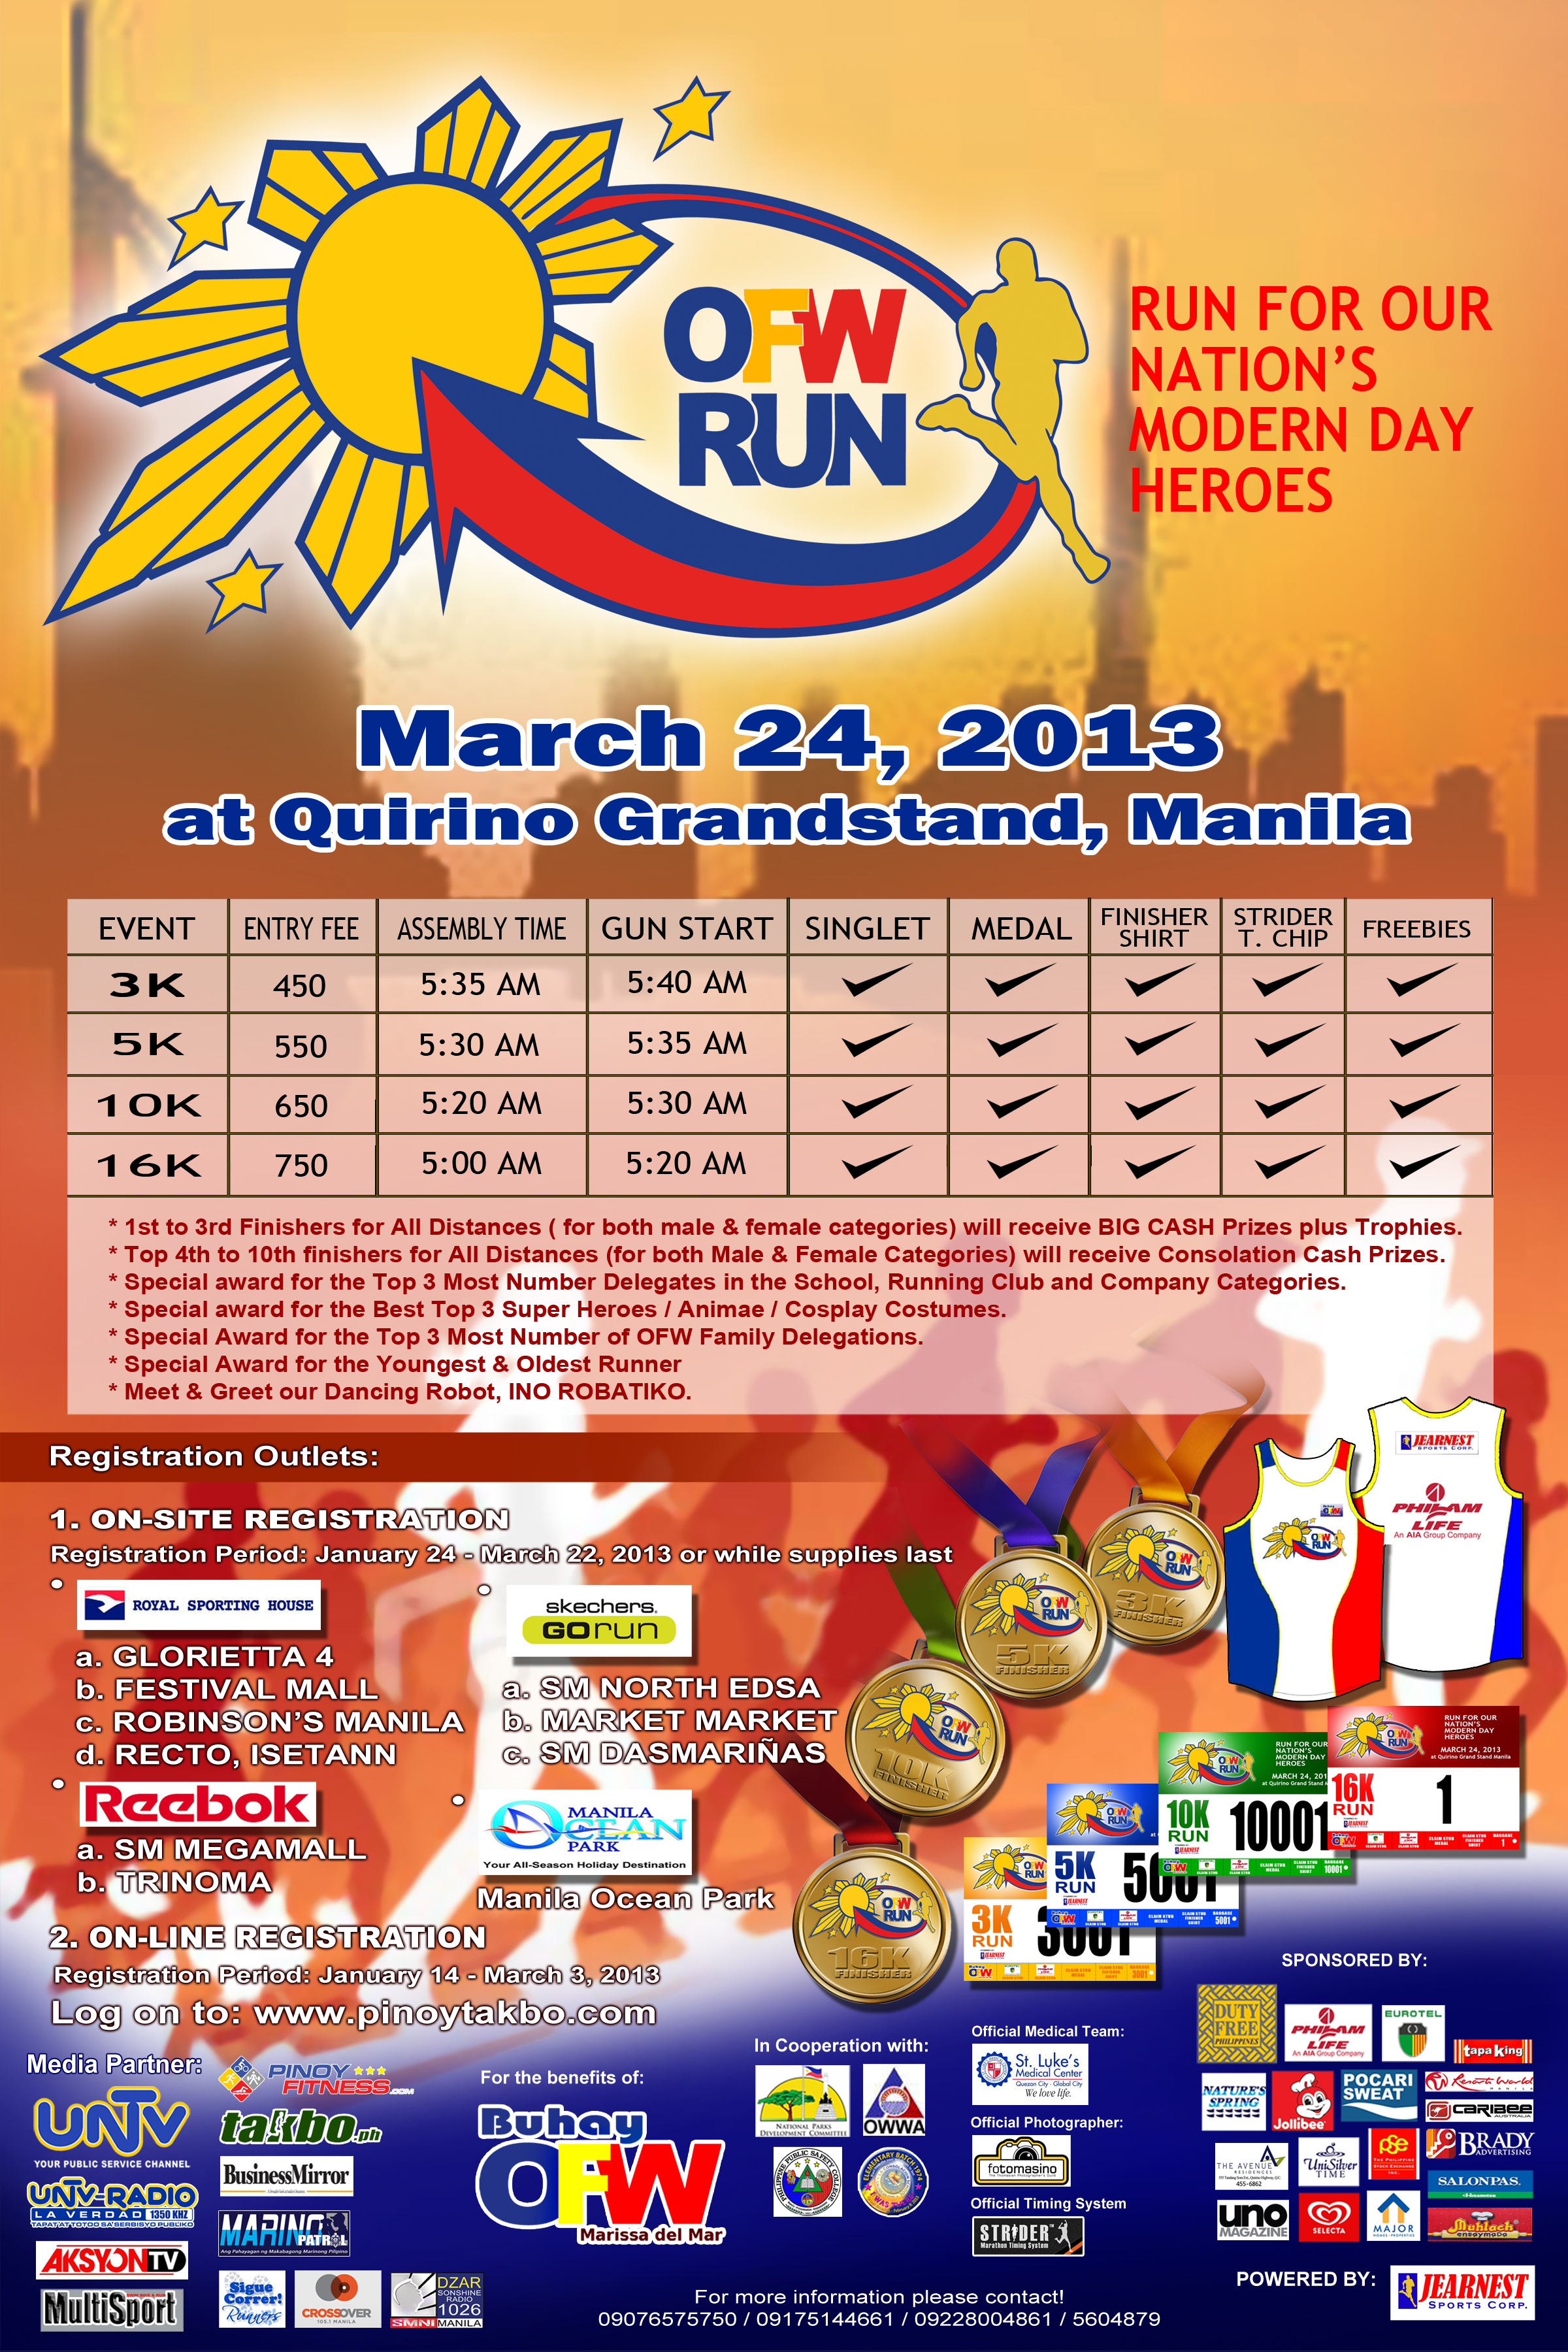 ofw run 2013 results and photos